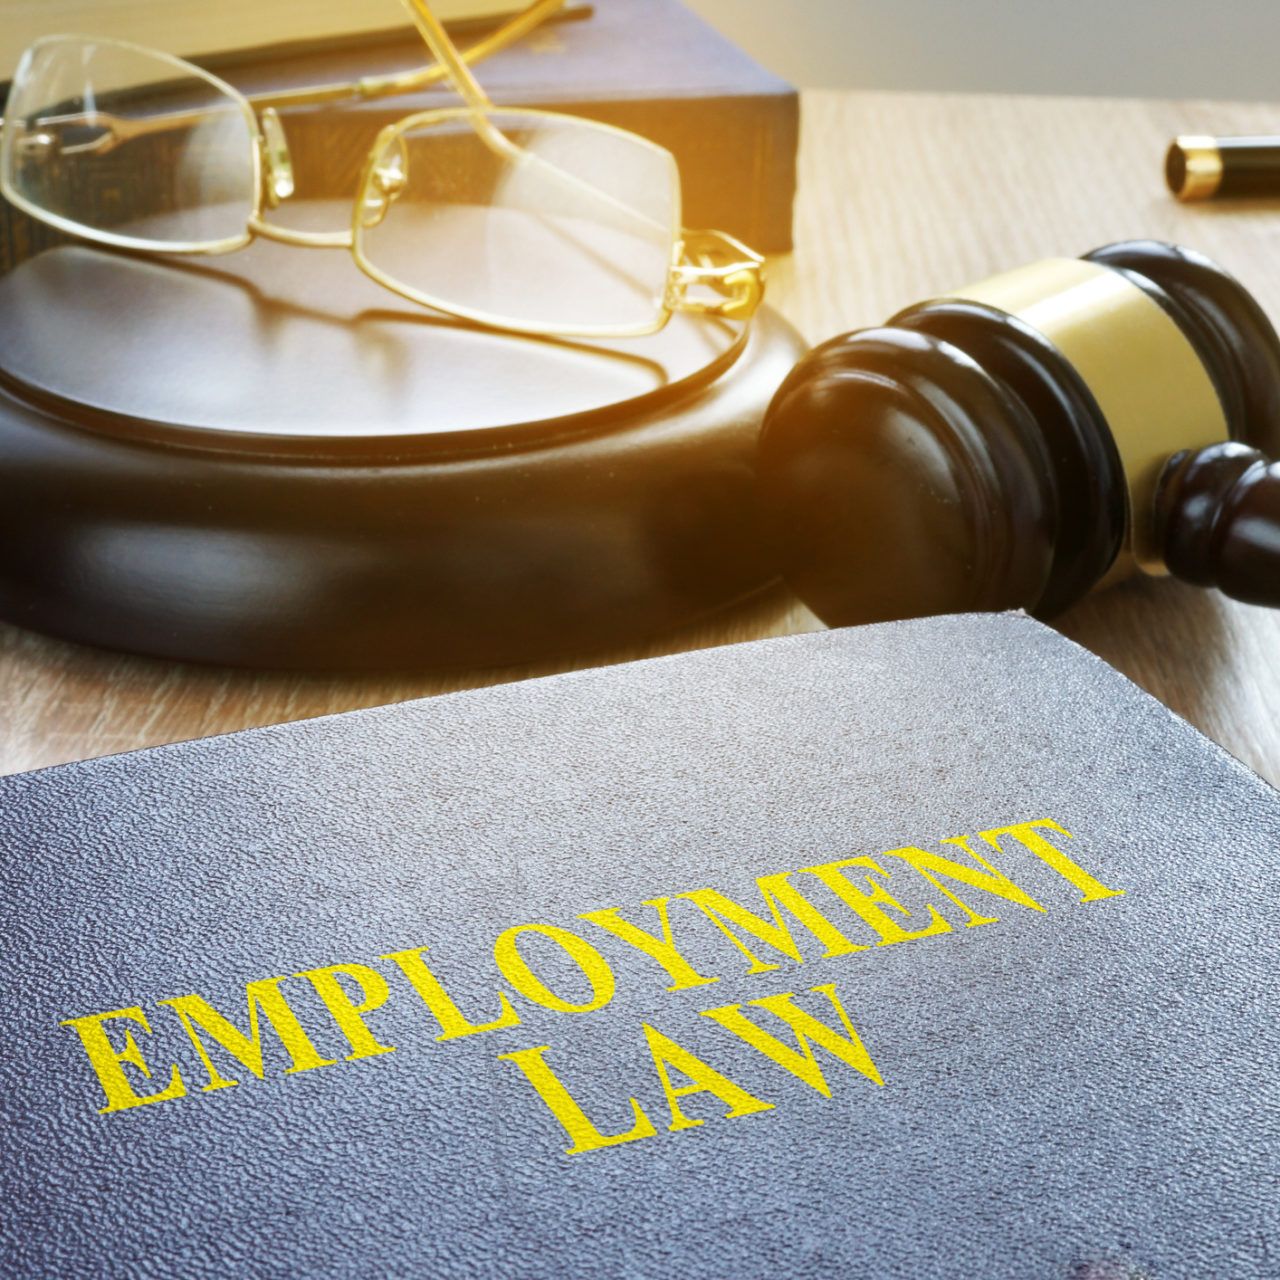 Get Your Free Employment Case Evaluation